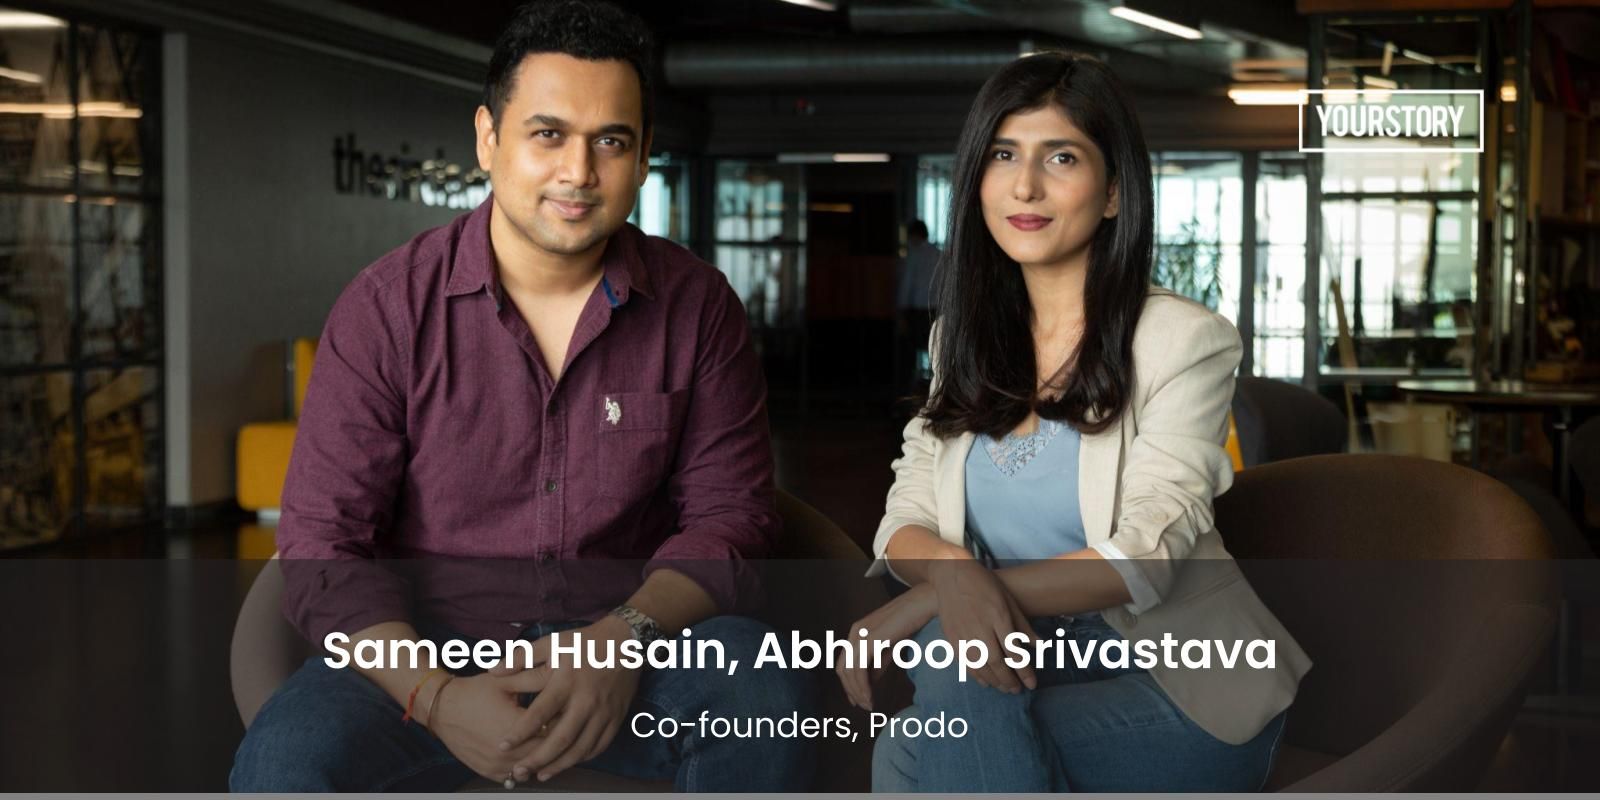 [Funding alert] Procurement startup Prodo raises Rs 3 Cr in pre-seed round led by Titan Capital, LetsVenture 